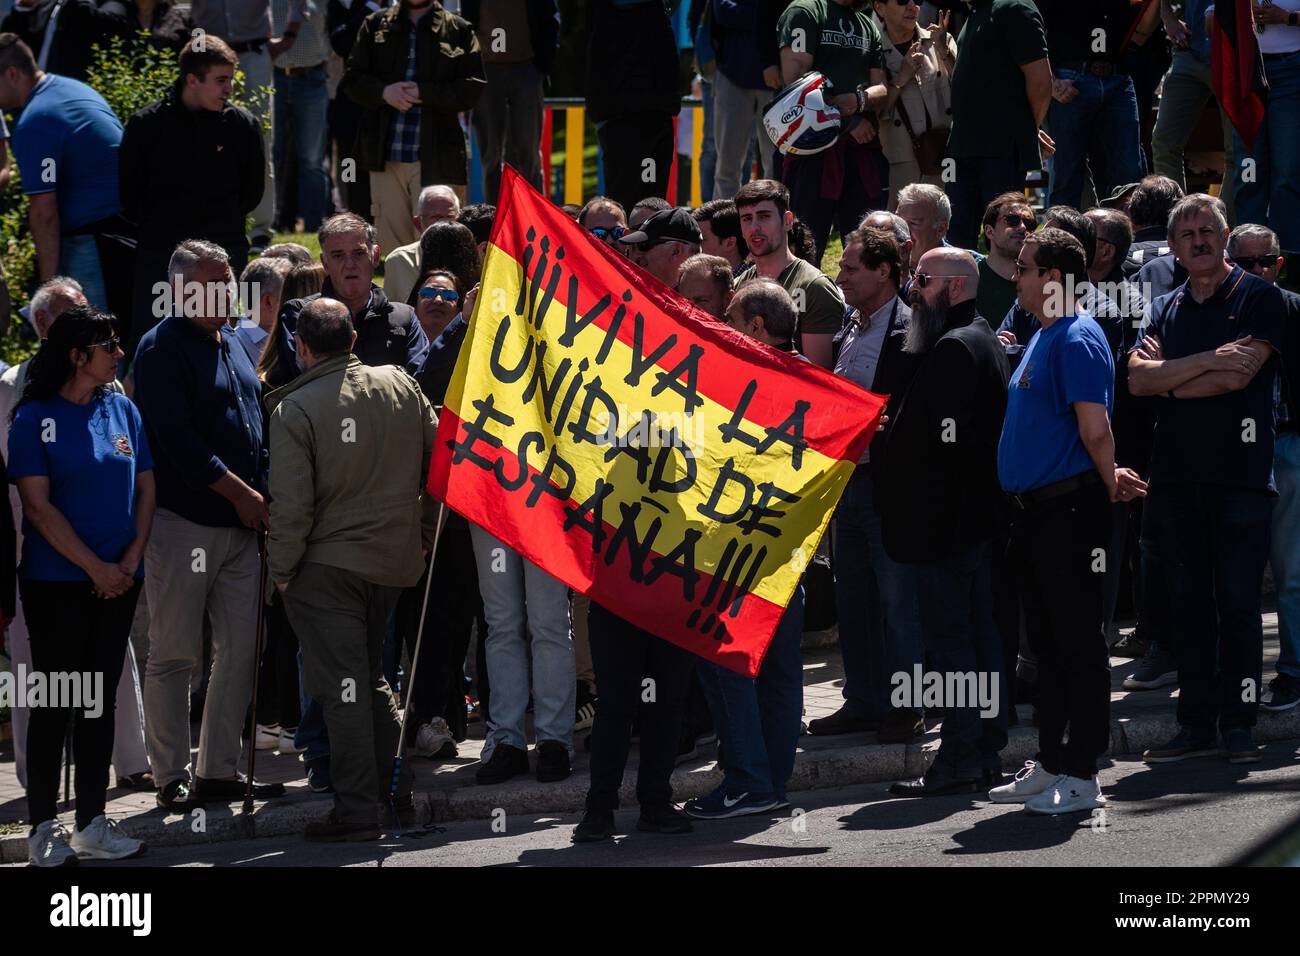 Madrid, Spain. 24th Apr, 2023. A flag of Spain with the words 'Long live the unity of Spain' is seen during a protest in front of the San Isidro cemetery. Members and supporters of La Falange party have gathered to protest the day of the exhumation of the remains of the founder of Falange, Jose Antonio Primo de Rivera, the fascist politician's remains were exhumed from the Valle de los Caidos (known now as Valle de Cuelgamuros) and transferred to the San Isidro cemetery. Credit: Marcos del Mazo/Alamy Live News Stock Photo